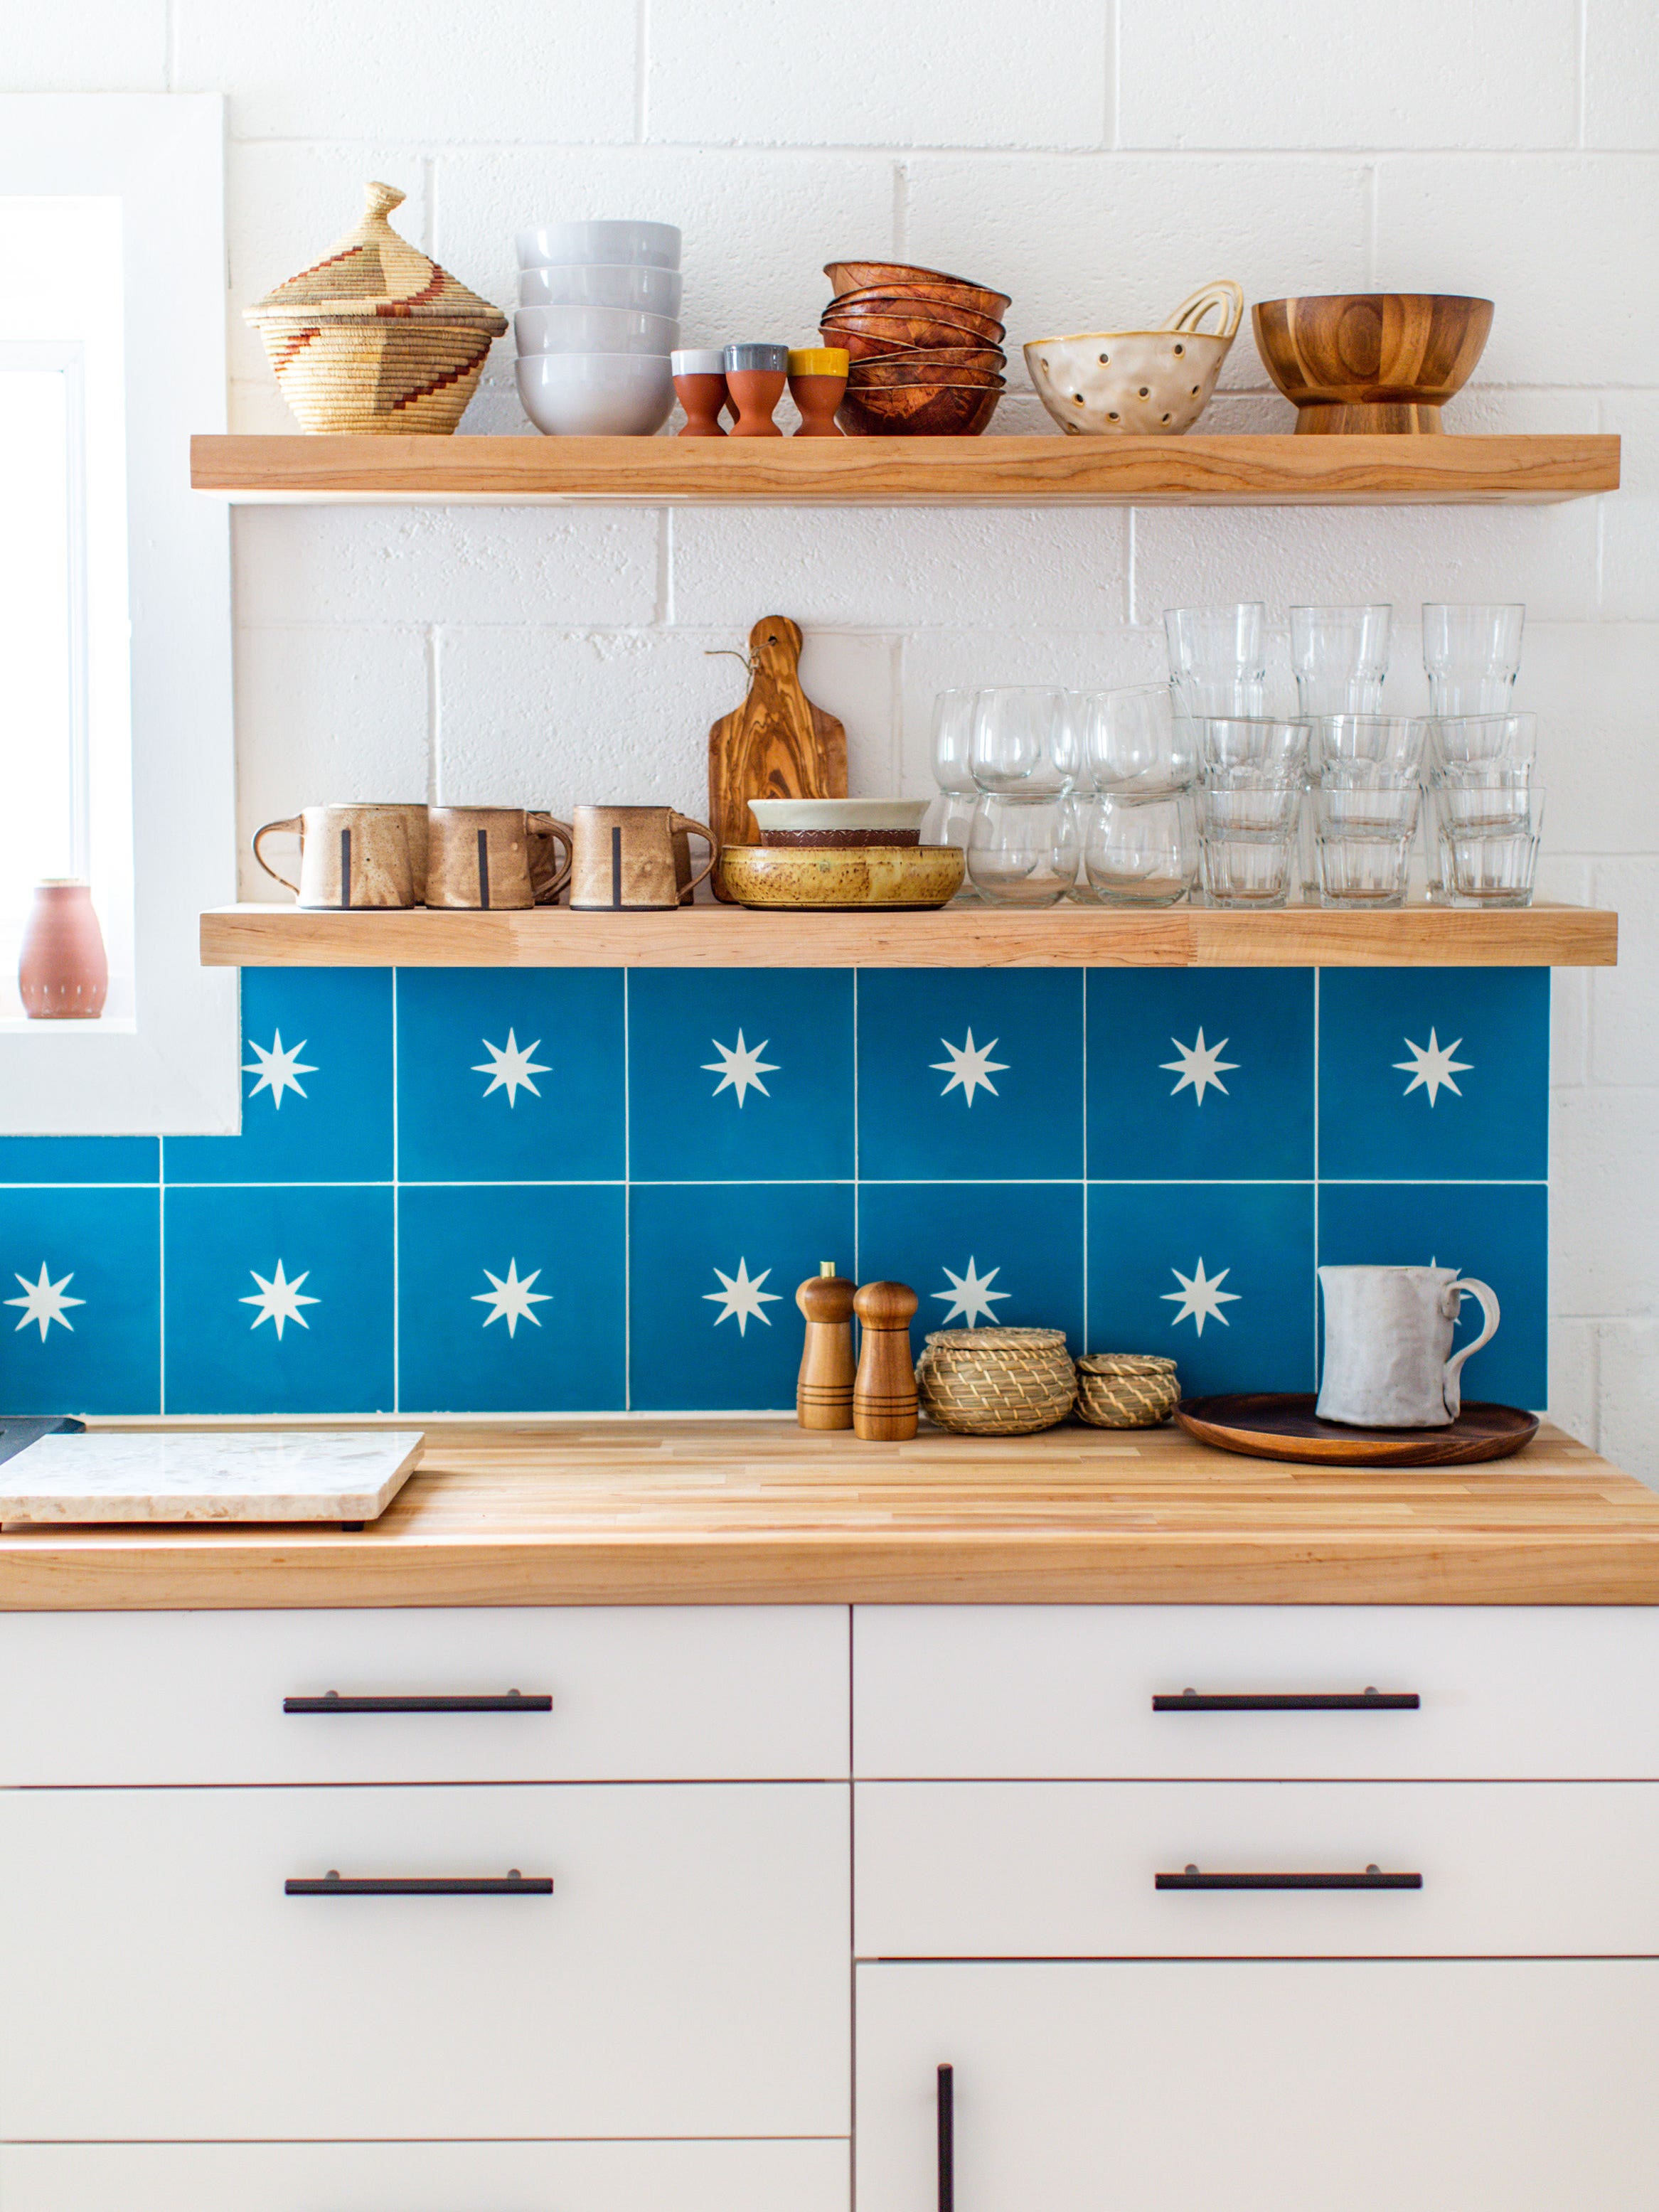 Why Settle for a Bland Kitchen Remodel When These Colorful Options Exist?